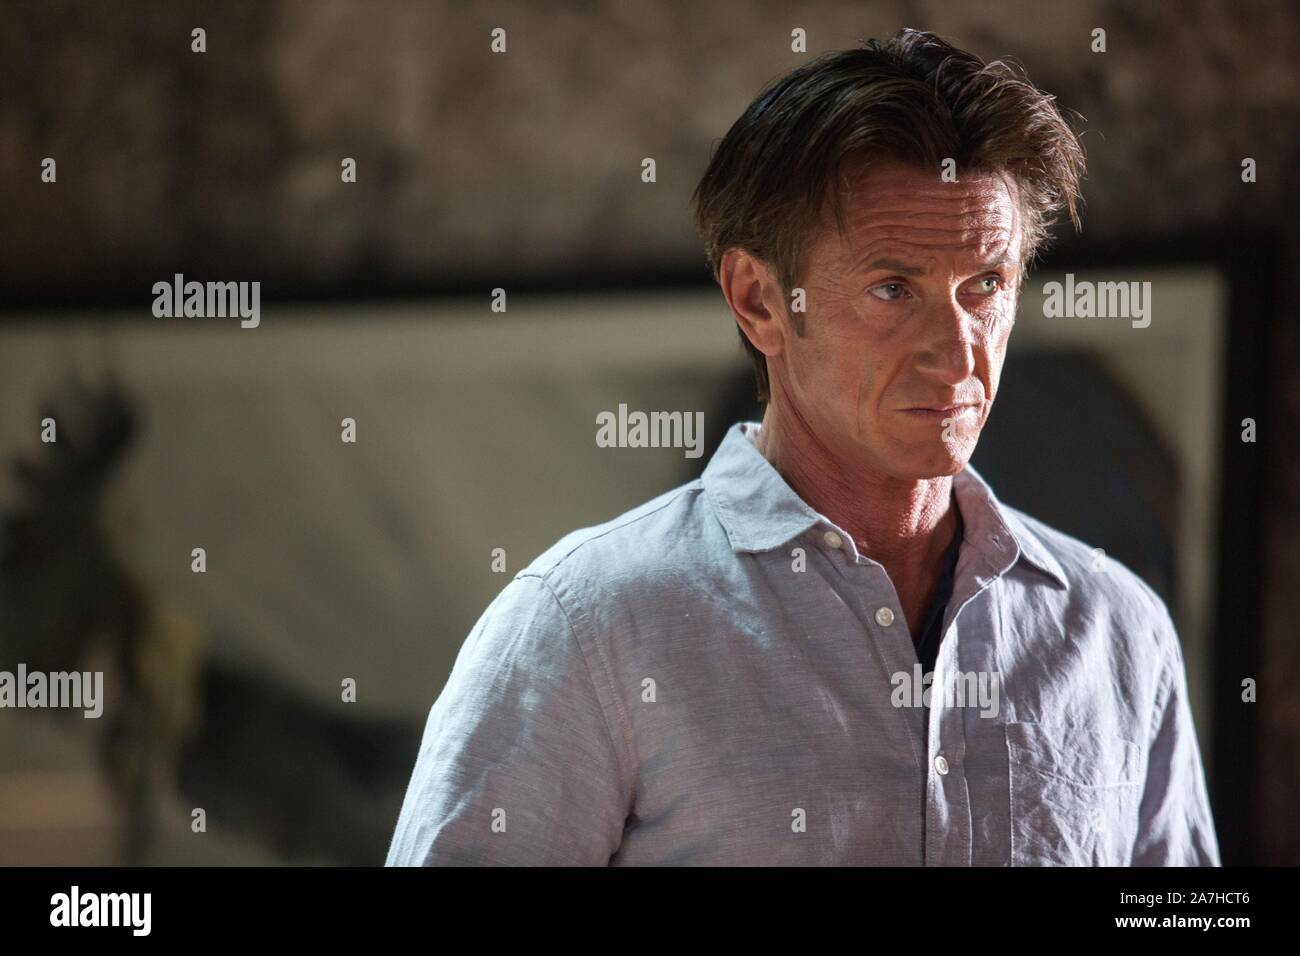 SEAN PENN in THE GUNMAN (2015), directed by PIERRE MOREL. Credit: NOSTROMO PICTURES / Album Stock Photo